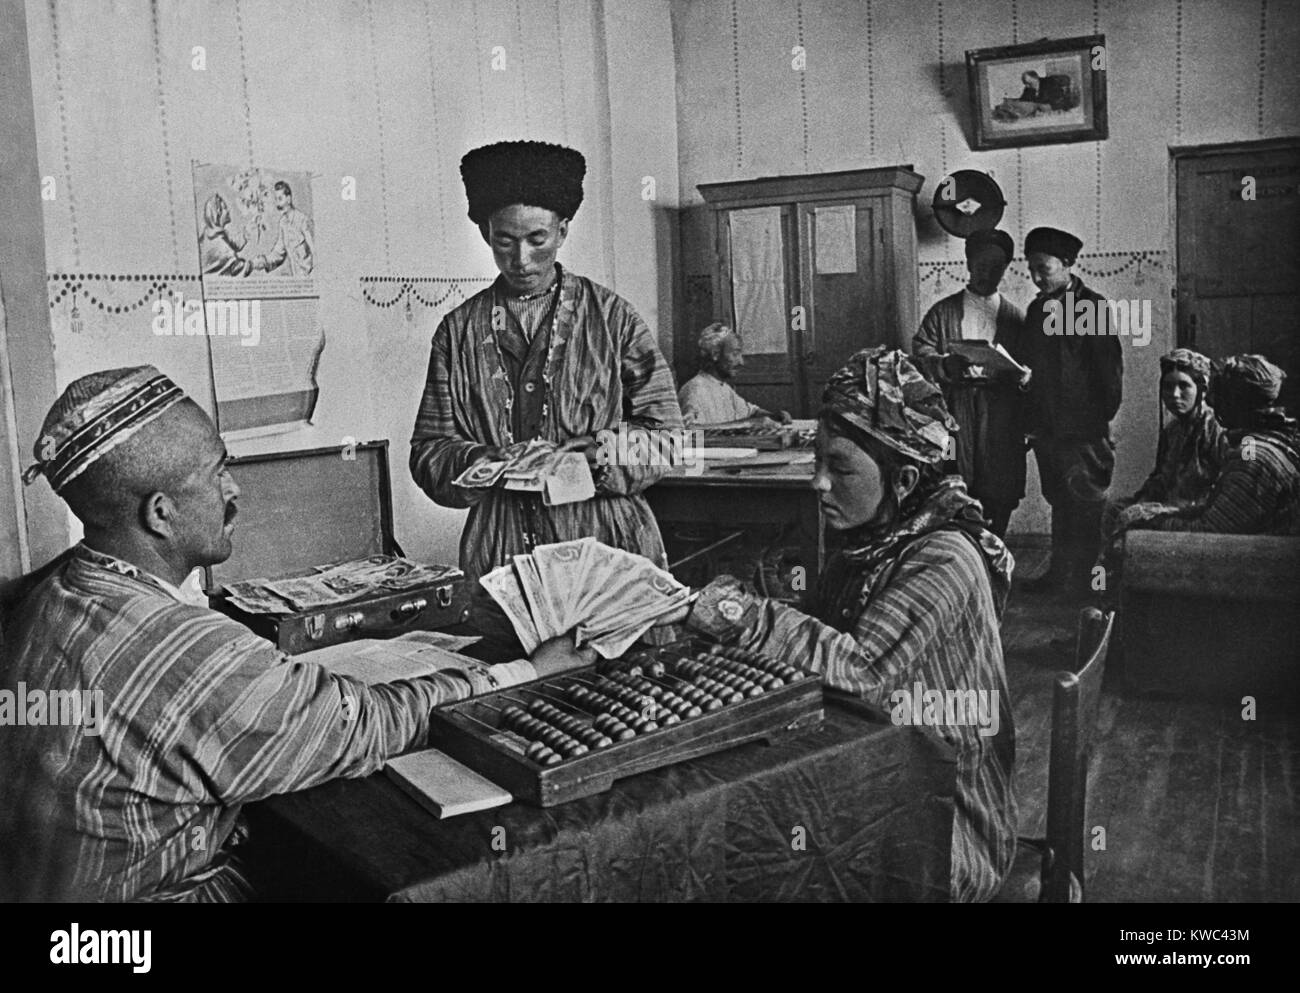 Turkmenian collective farmers receiving their share of yearly profits in the 1930s. The farm administrator calculates with an Abacus. Pictures of Stalin and Lenin hang on the walls. (BSLOC 2015 14 6) Stock Photo